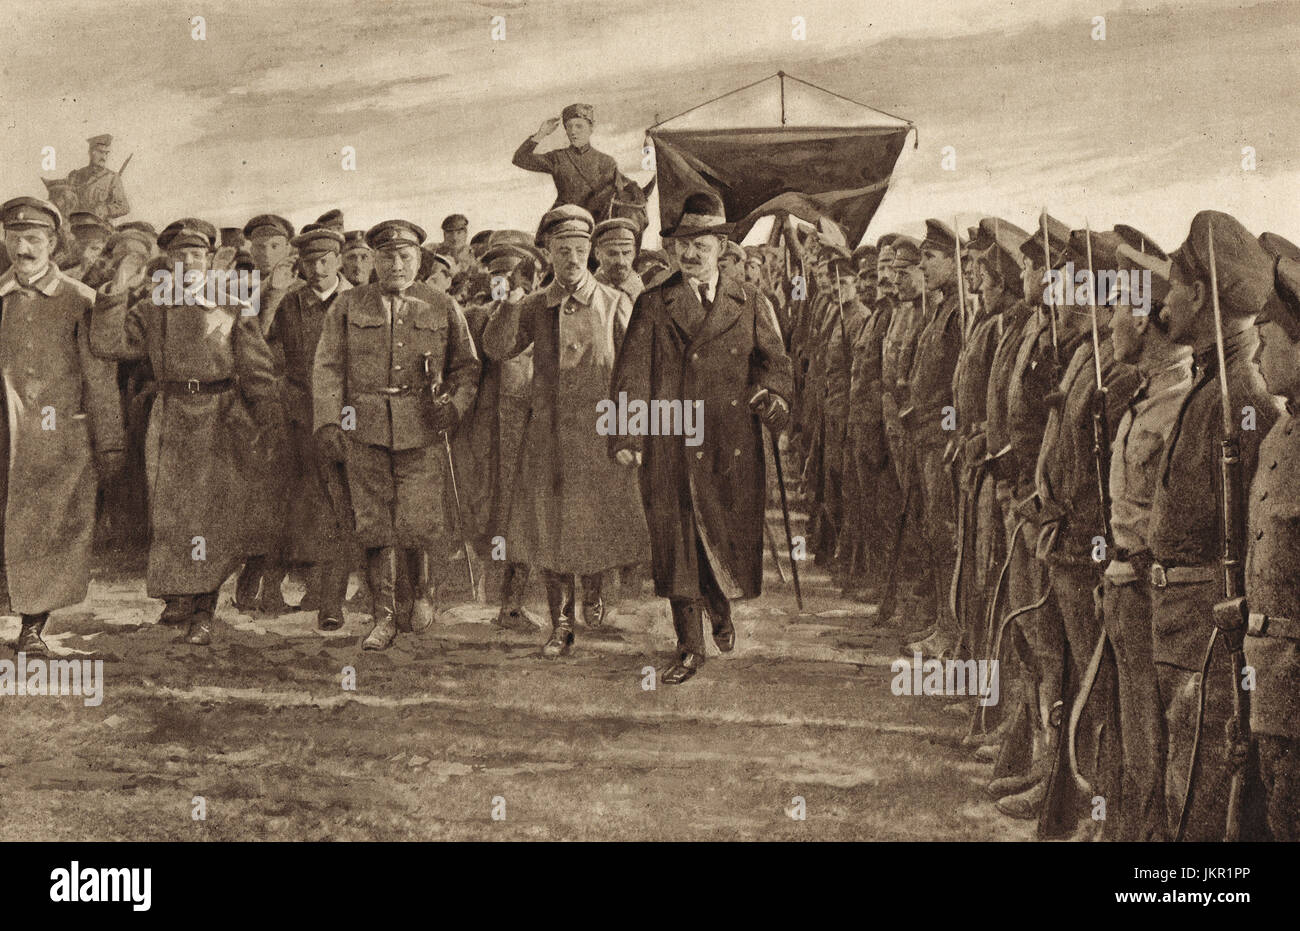 Leon Trotsky inspecting a Letts regiment of the Red Army Stock Photo